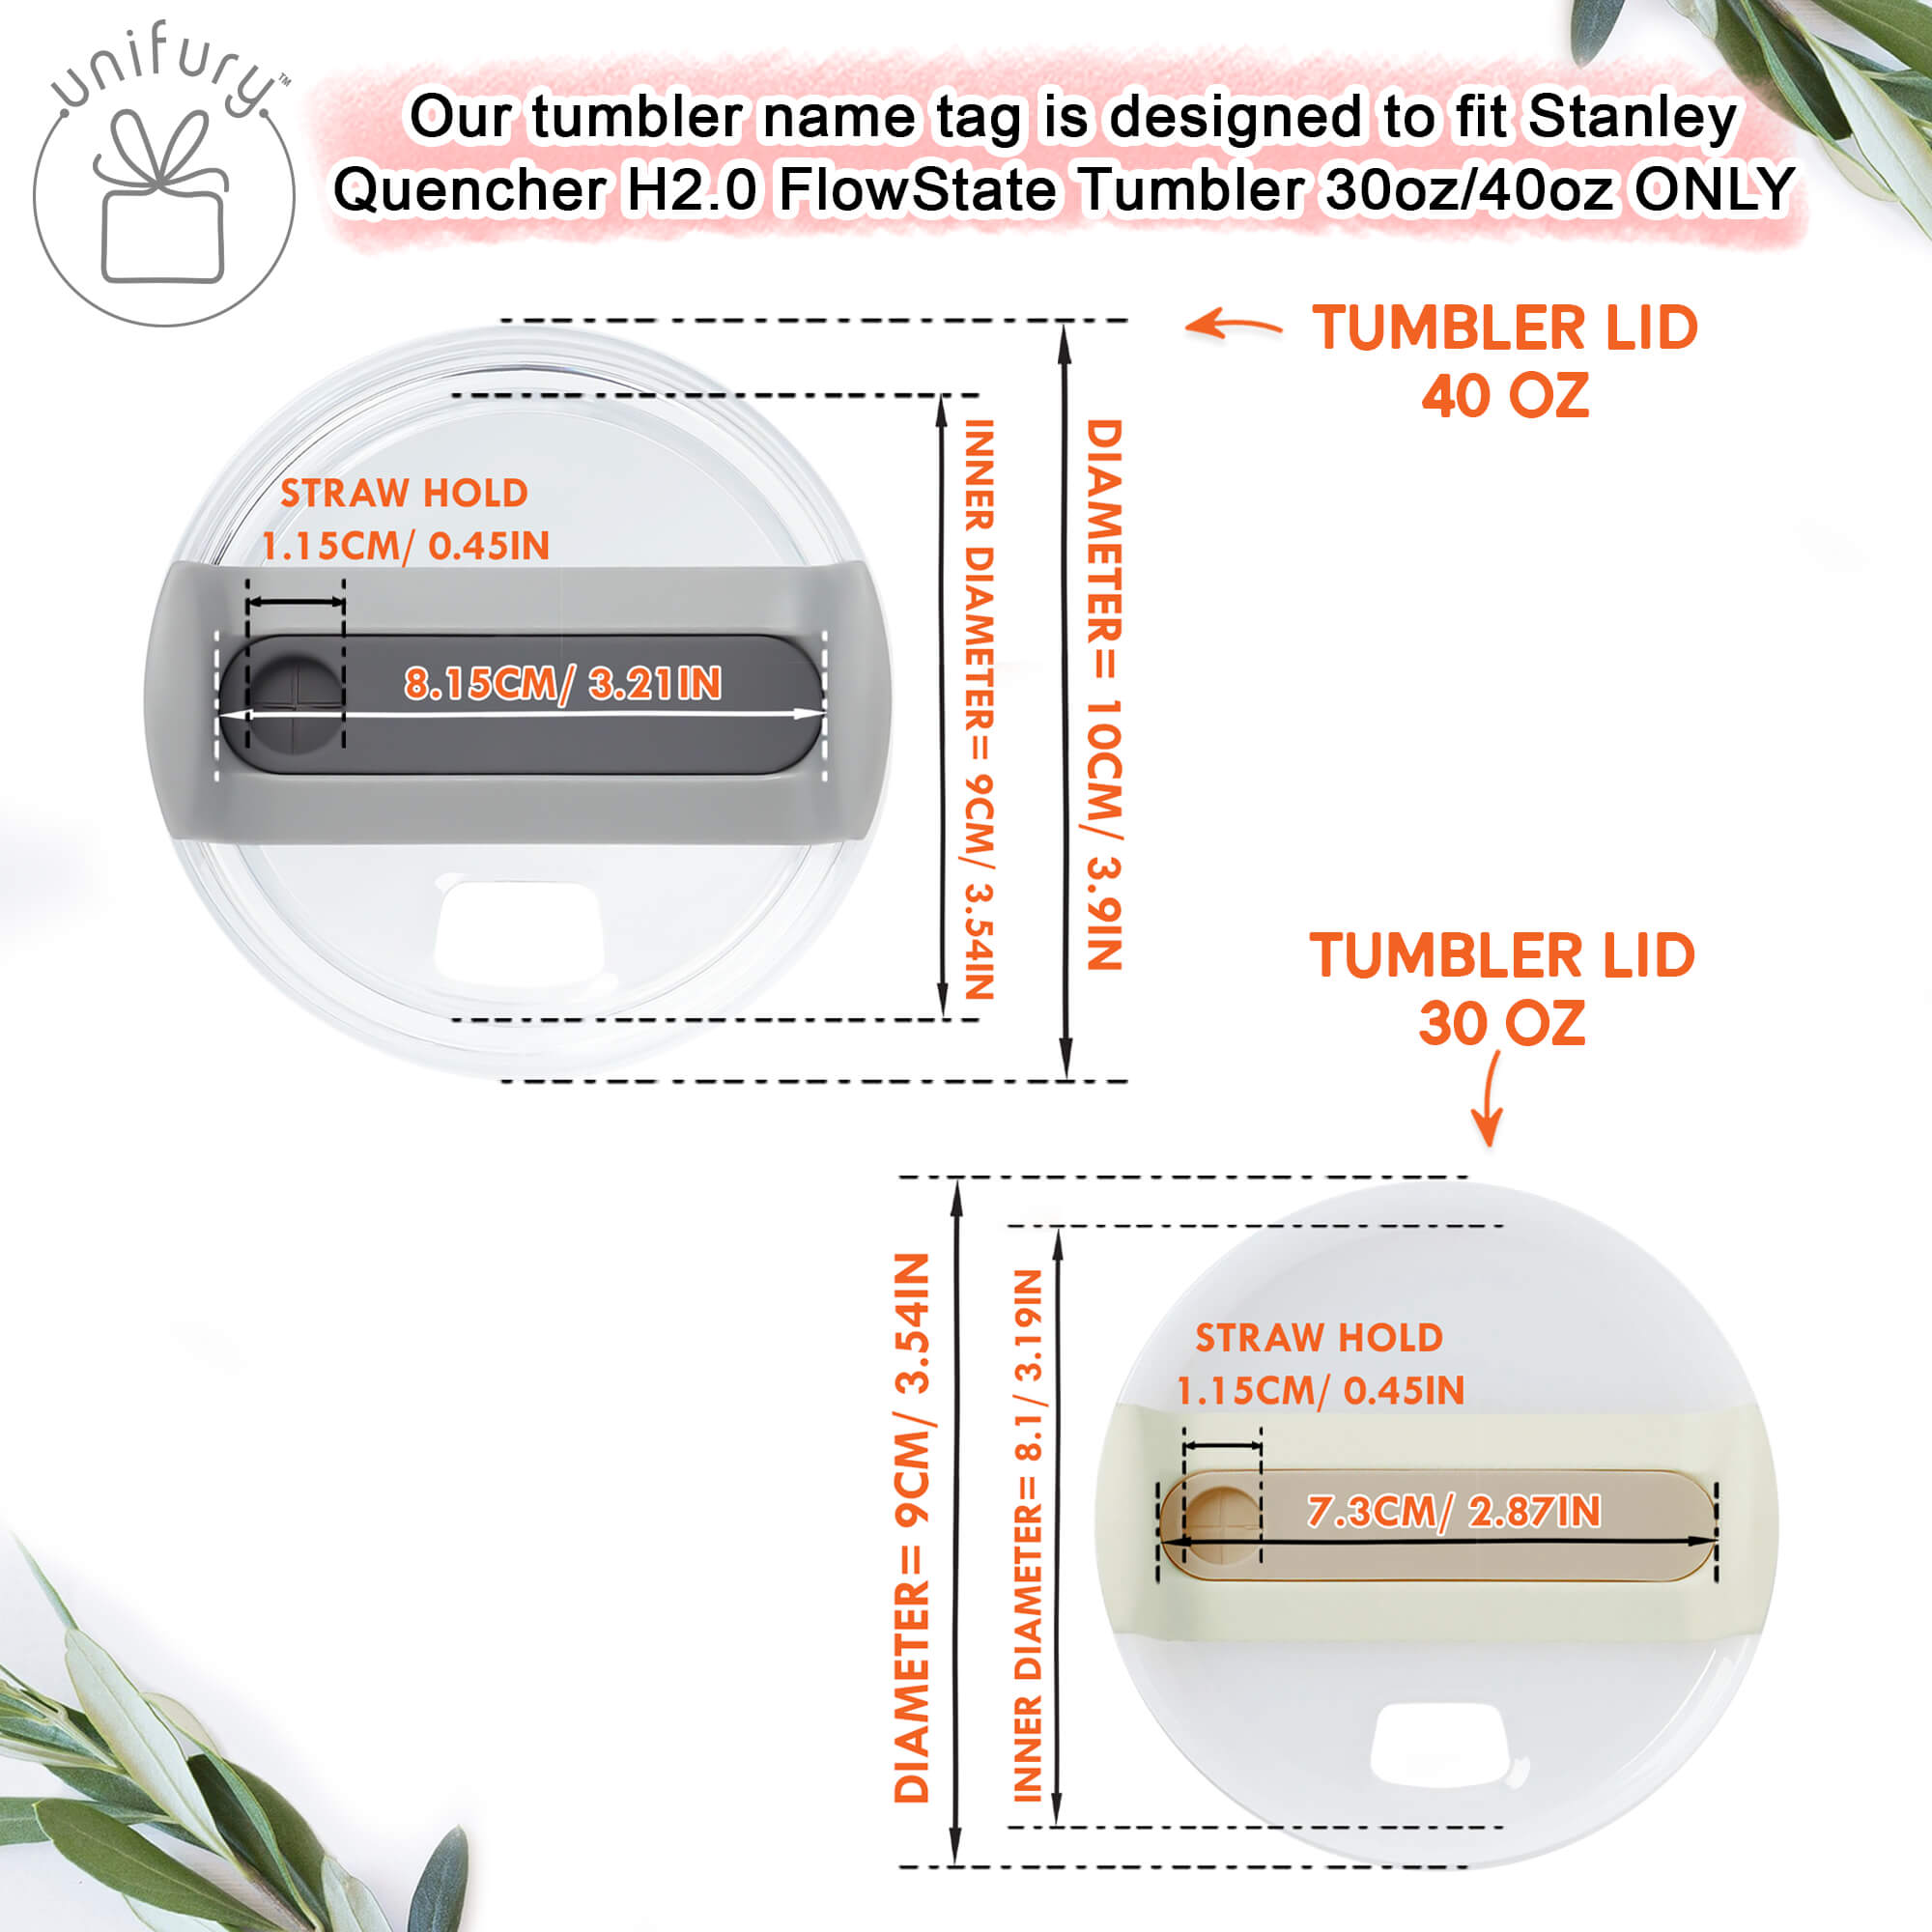 Tumbler Tags for Original Stanley Tumblers/Dupes – Hopefully Created